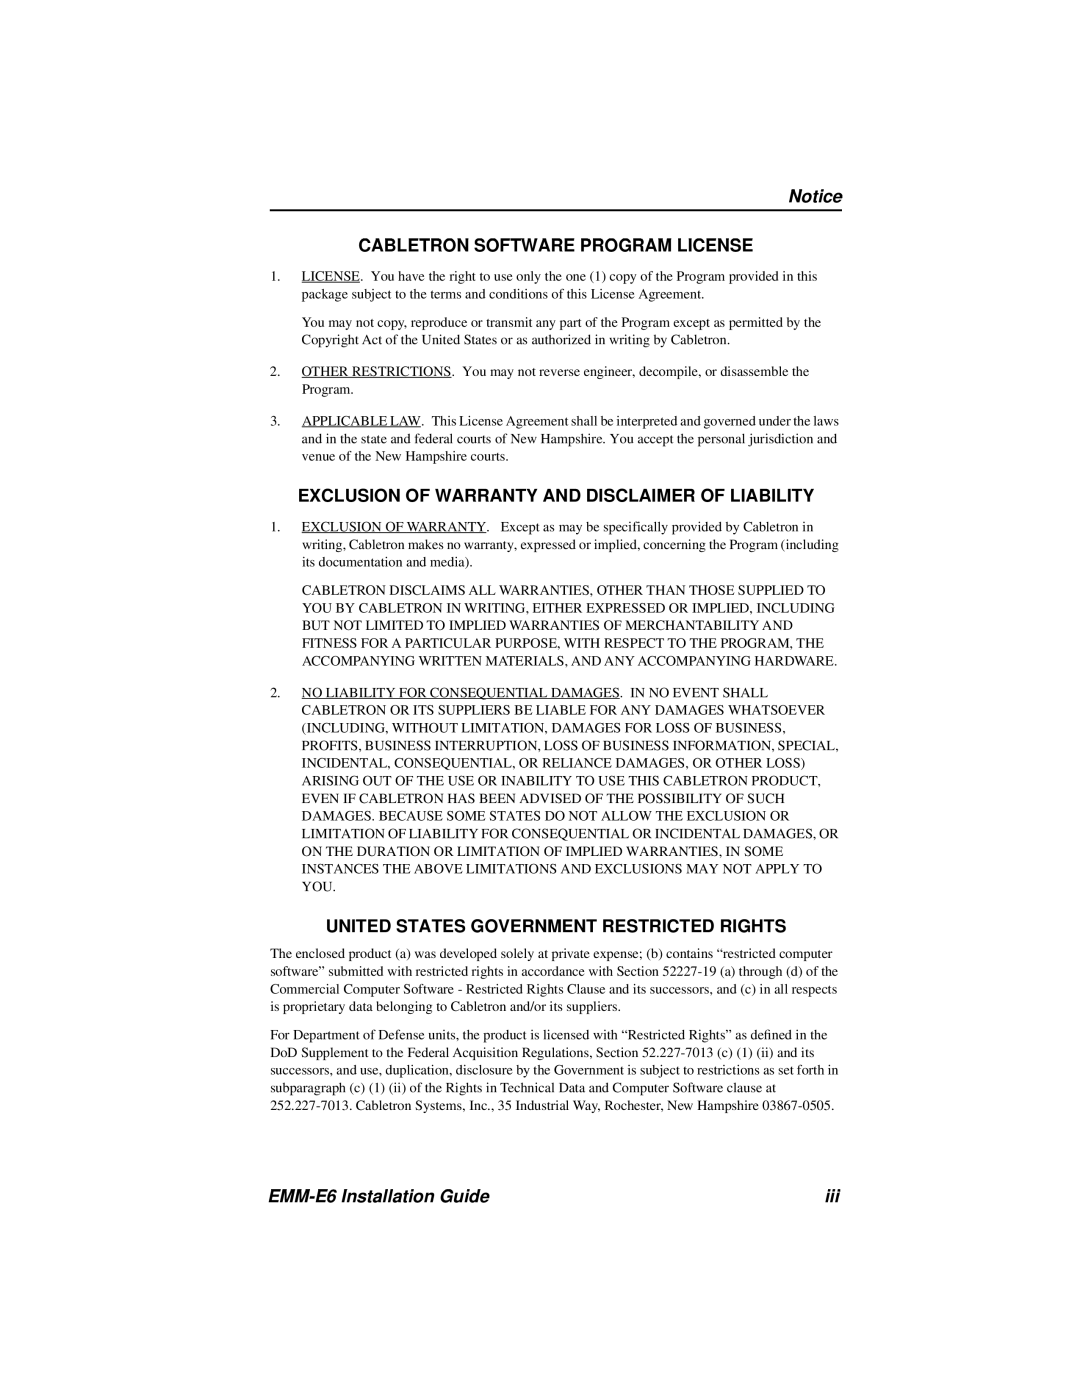 Cabletron Systems EMM-E6 manual Cabletron Software Program License, Exclusion Of Warranty And Disclaimer Of Liability 